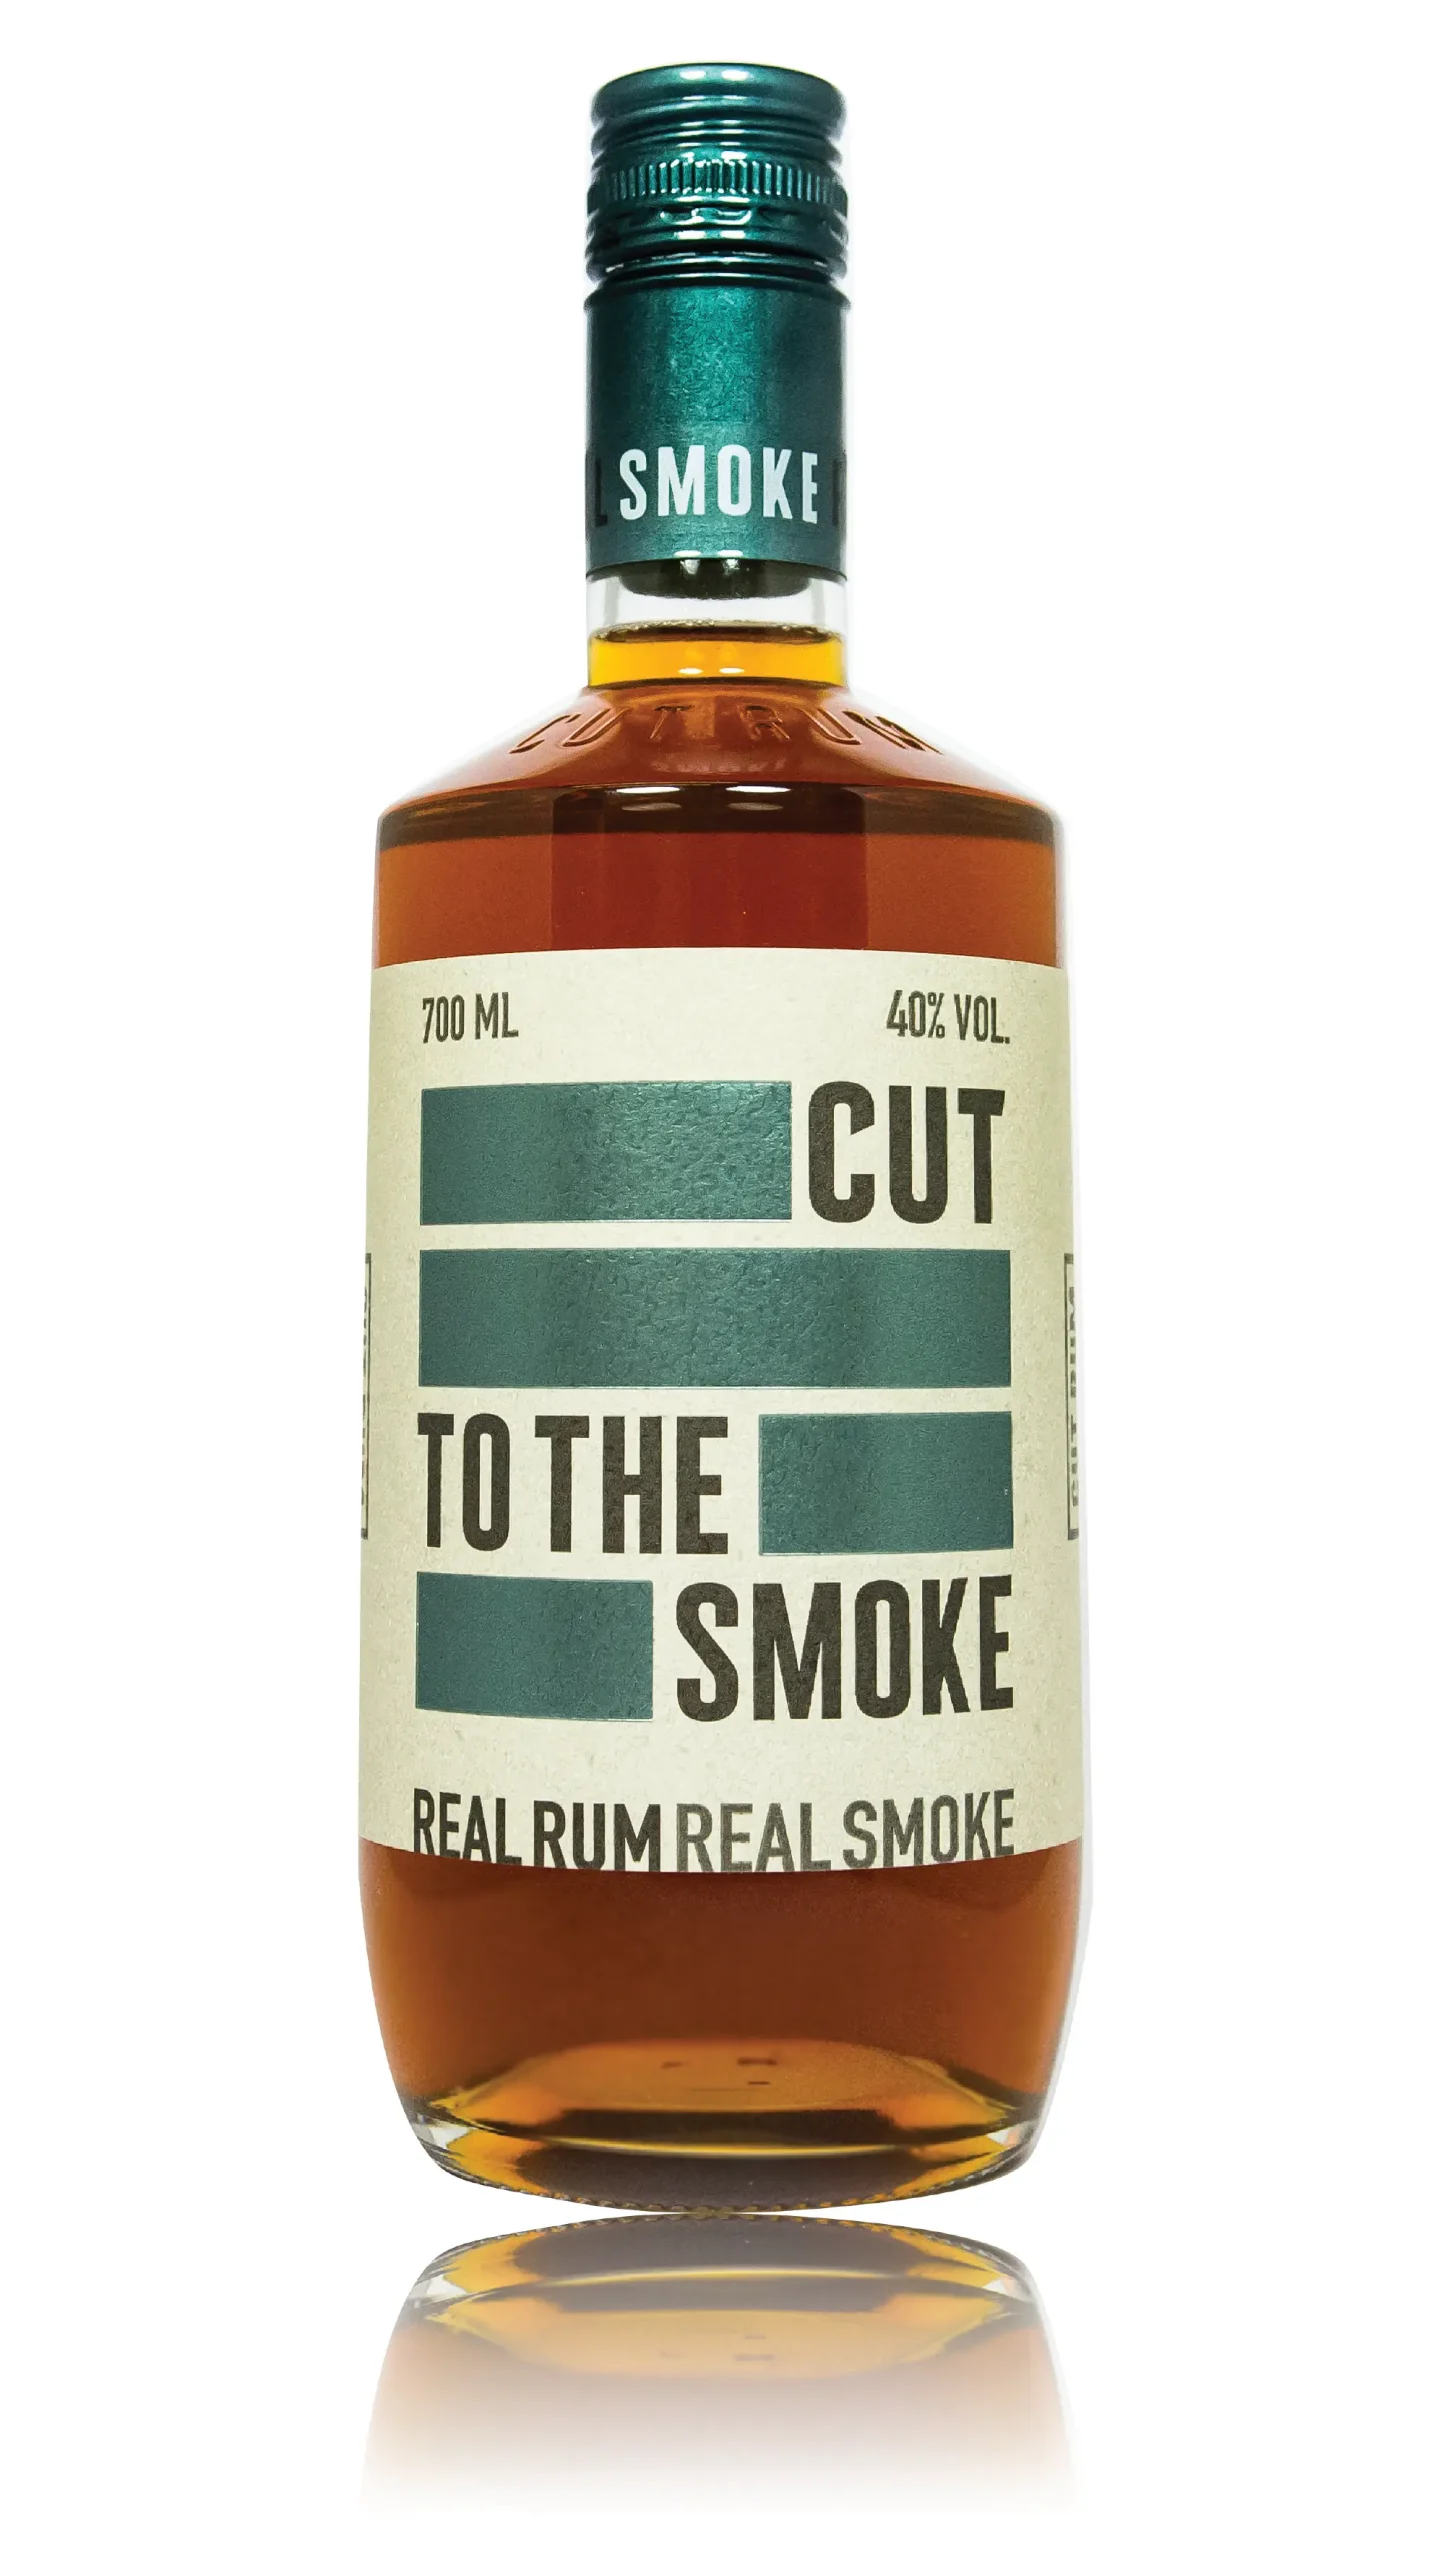 cut rum smoked real rum - How is smoked rum made